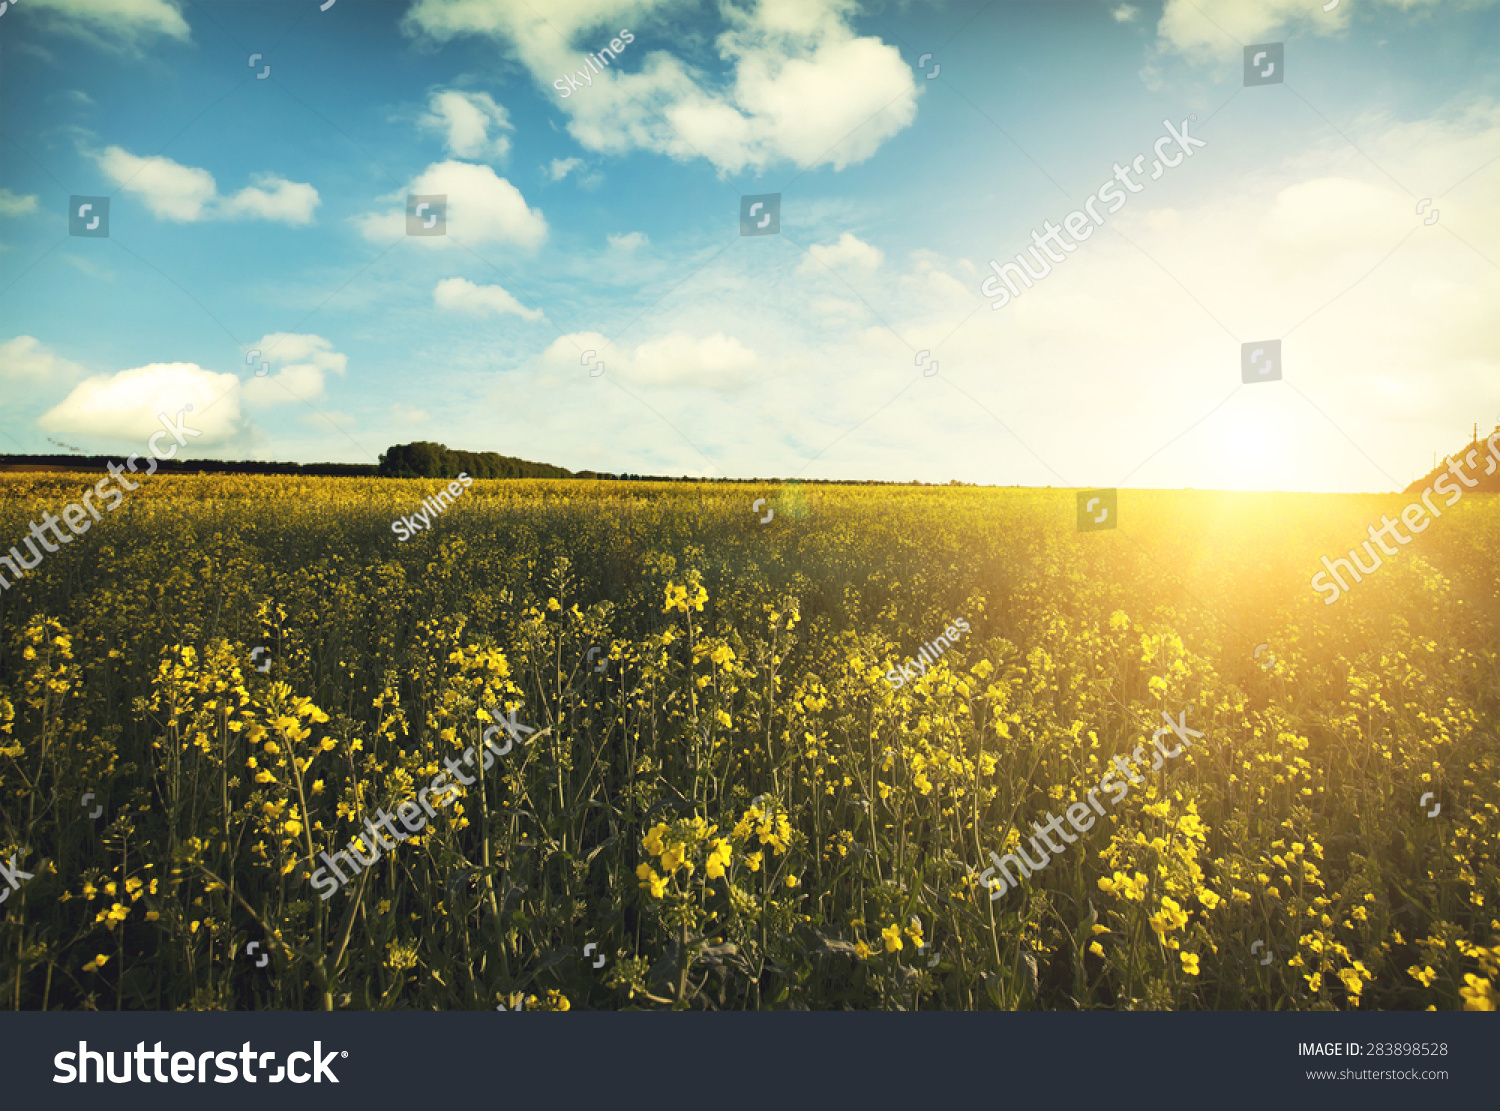 Large beautiful spring the field with a distant kind on a forest and dark sky #283898528